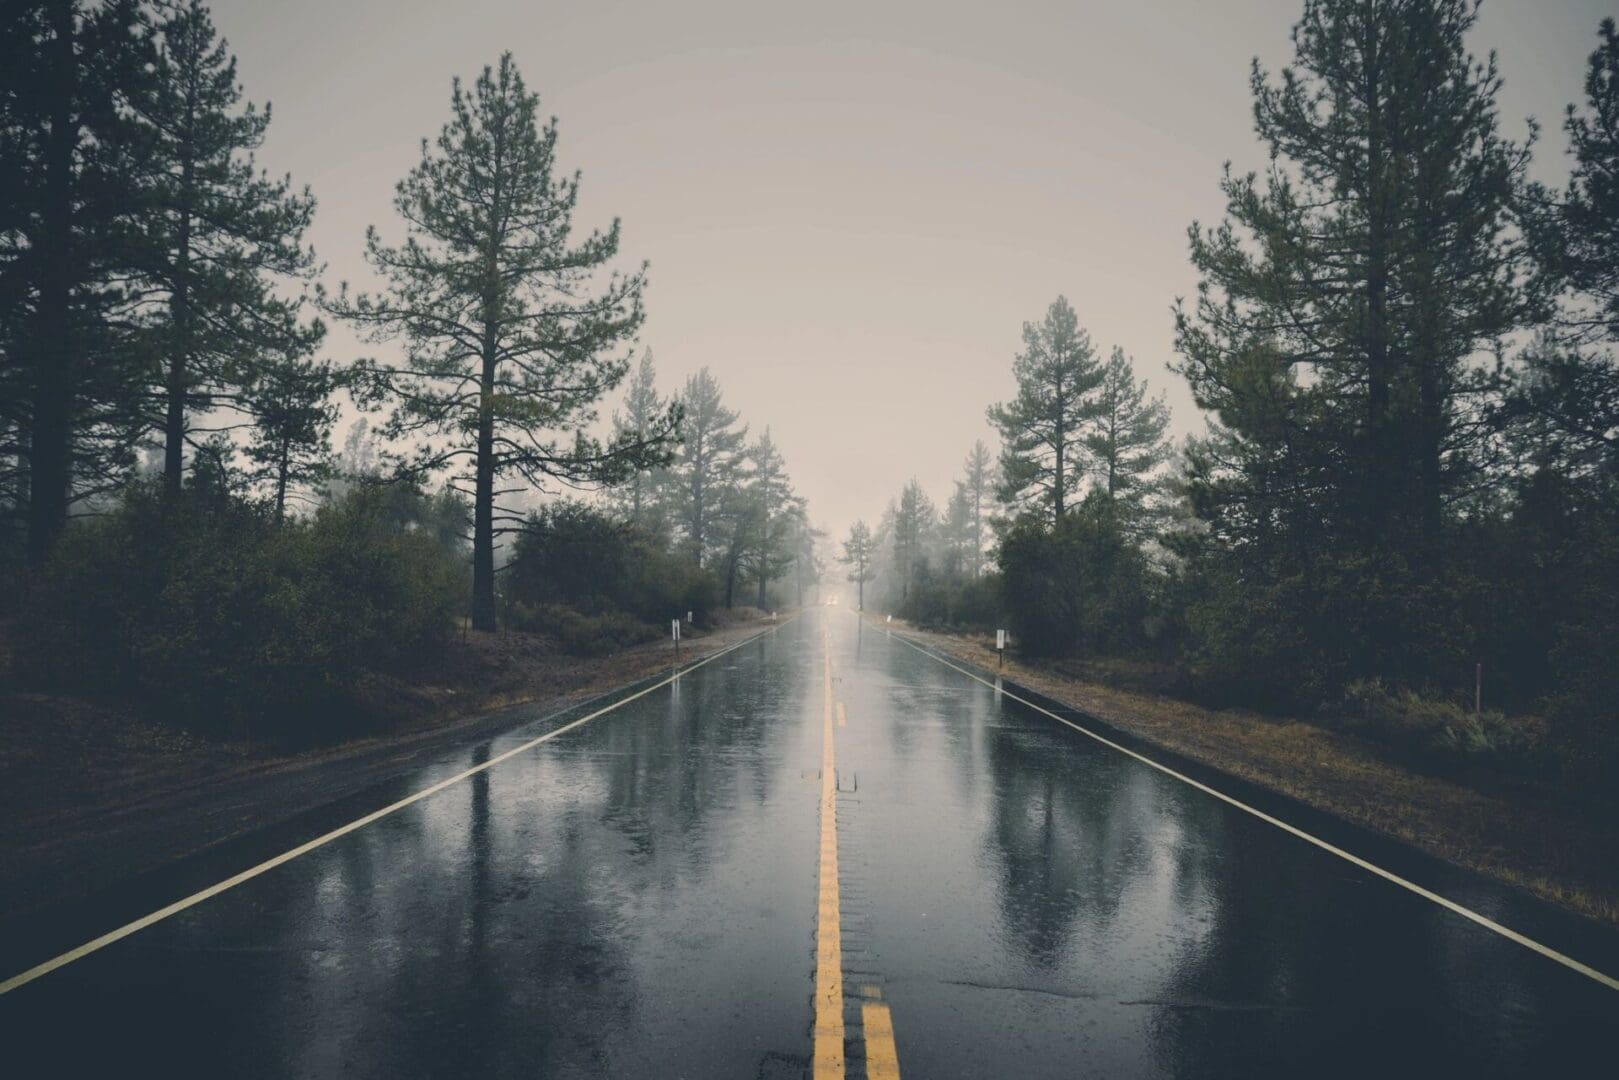 A wet, empty road flanked by trees on a foggy day.